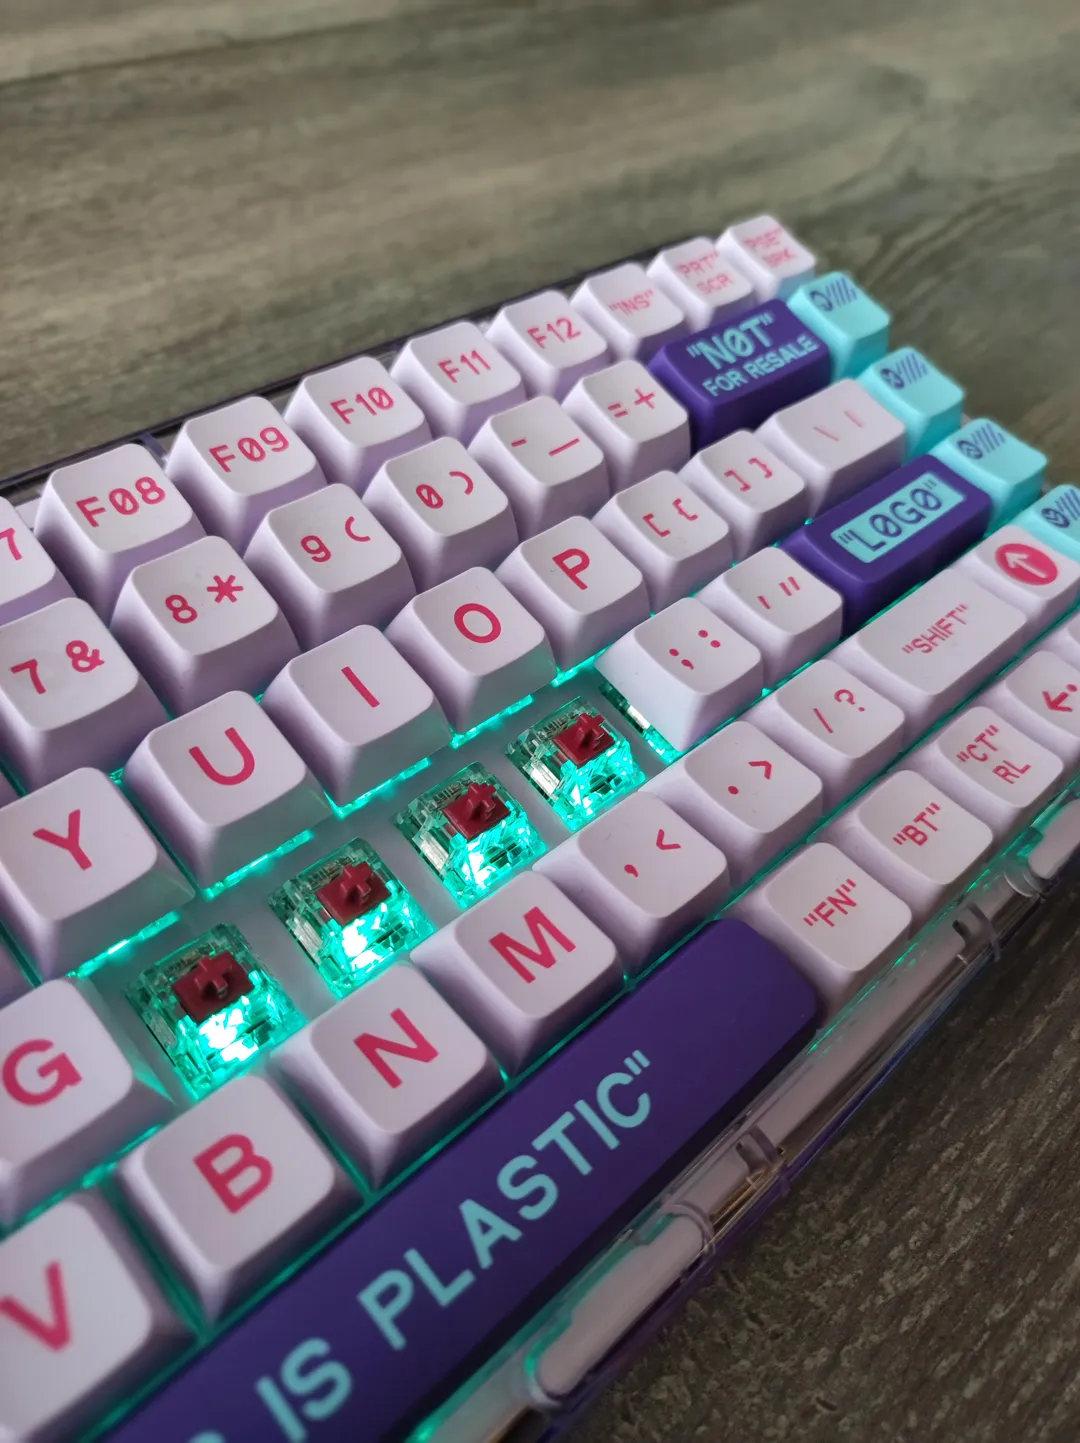 MelGeek Mojo84 Vaporwave side view with switches